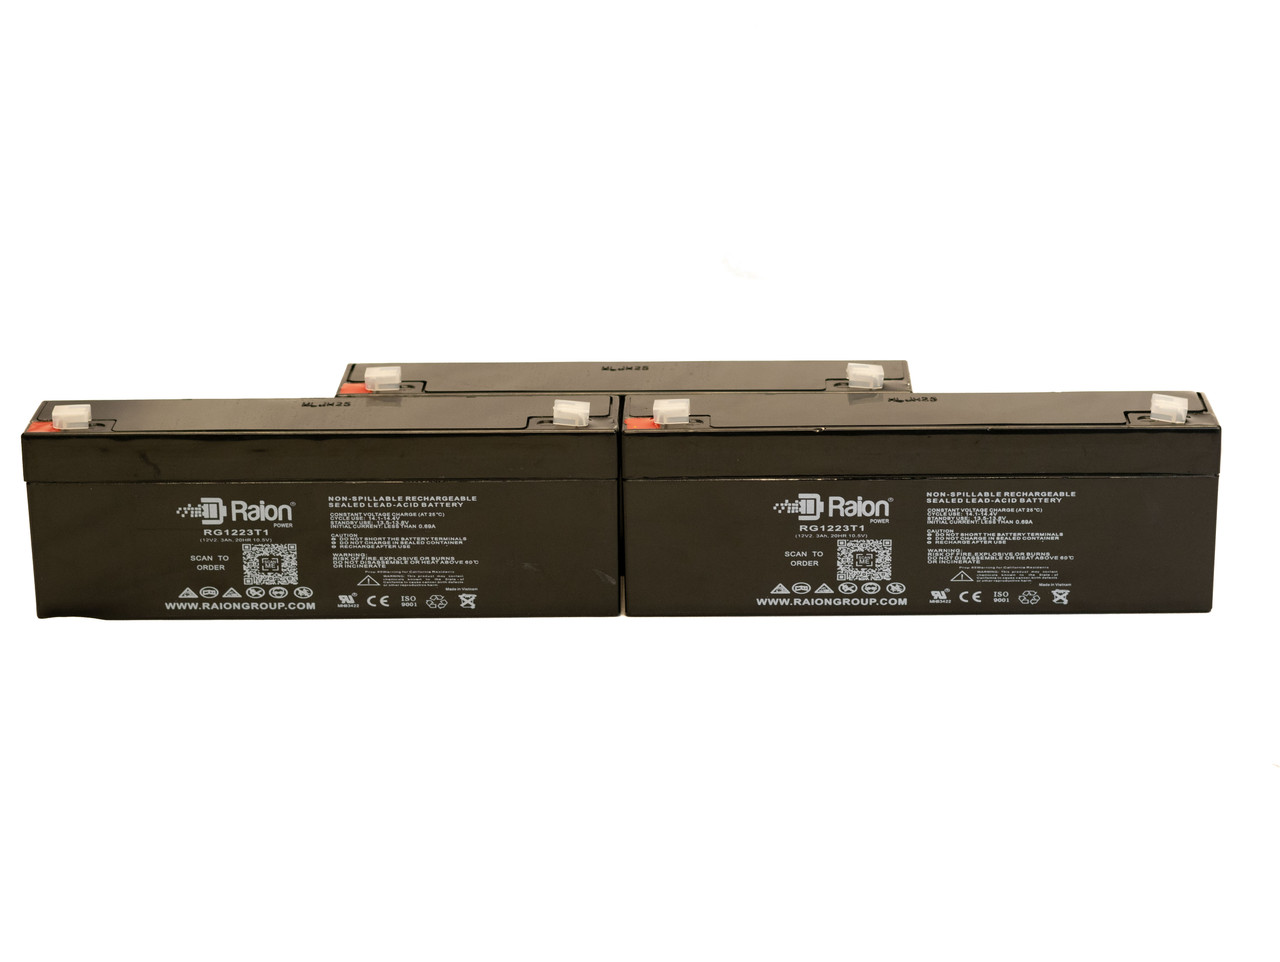 Raion Power 12V 2.3Ah RG1223T1 Compatible Replacement Battery for Plus Power PP12-2.3S - 3 Pack